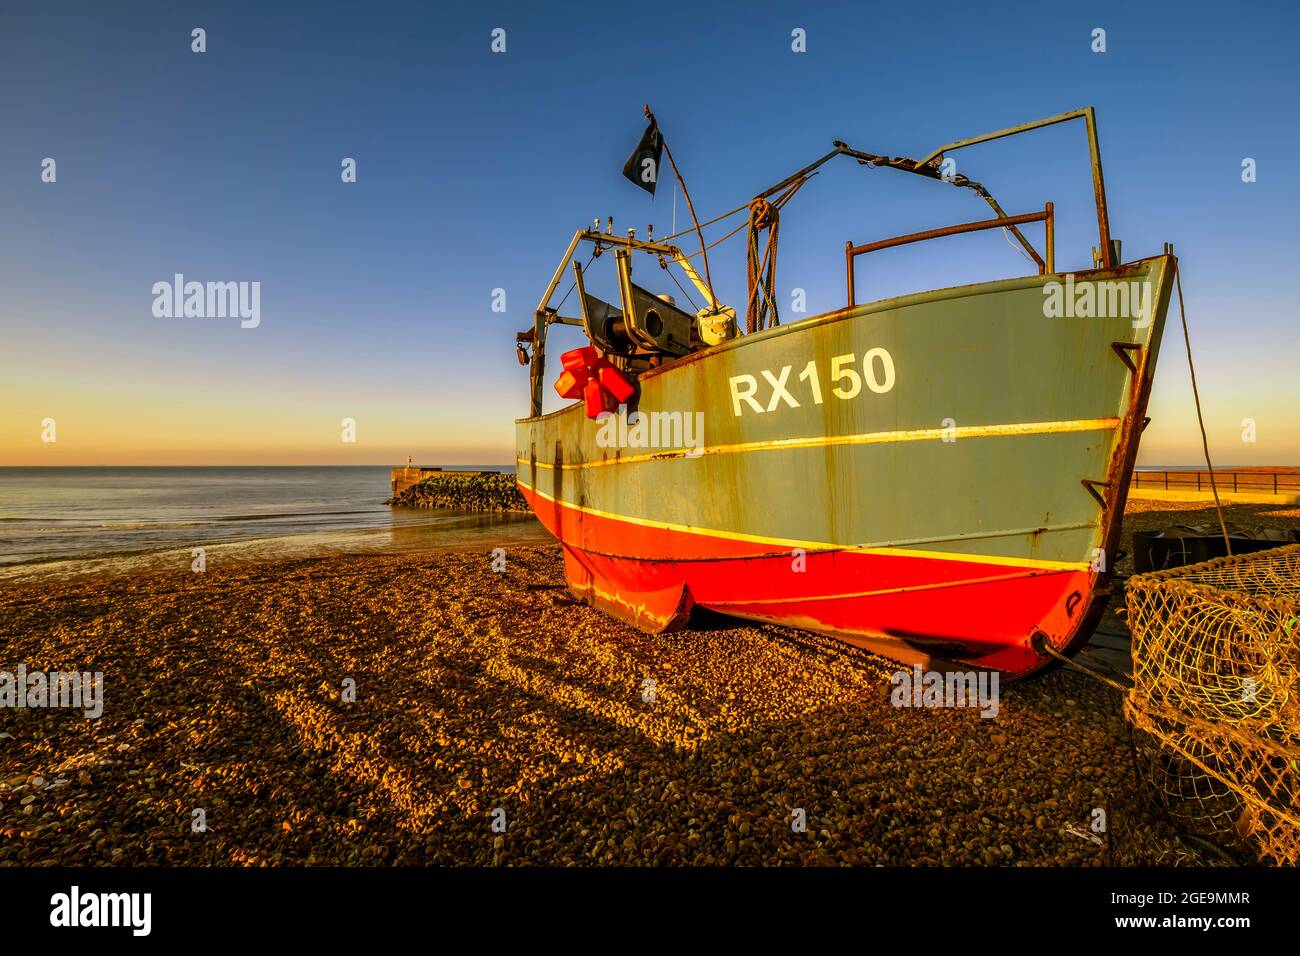 A fishing boat on The Stade beach in Hastings. Stock Photo